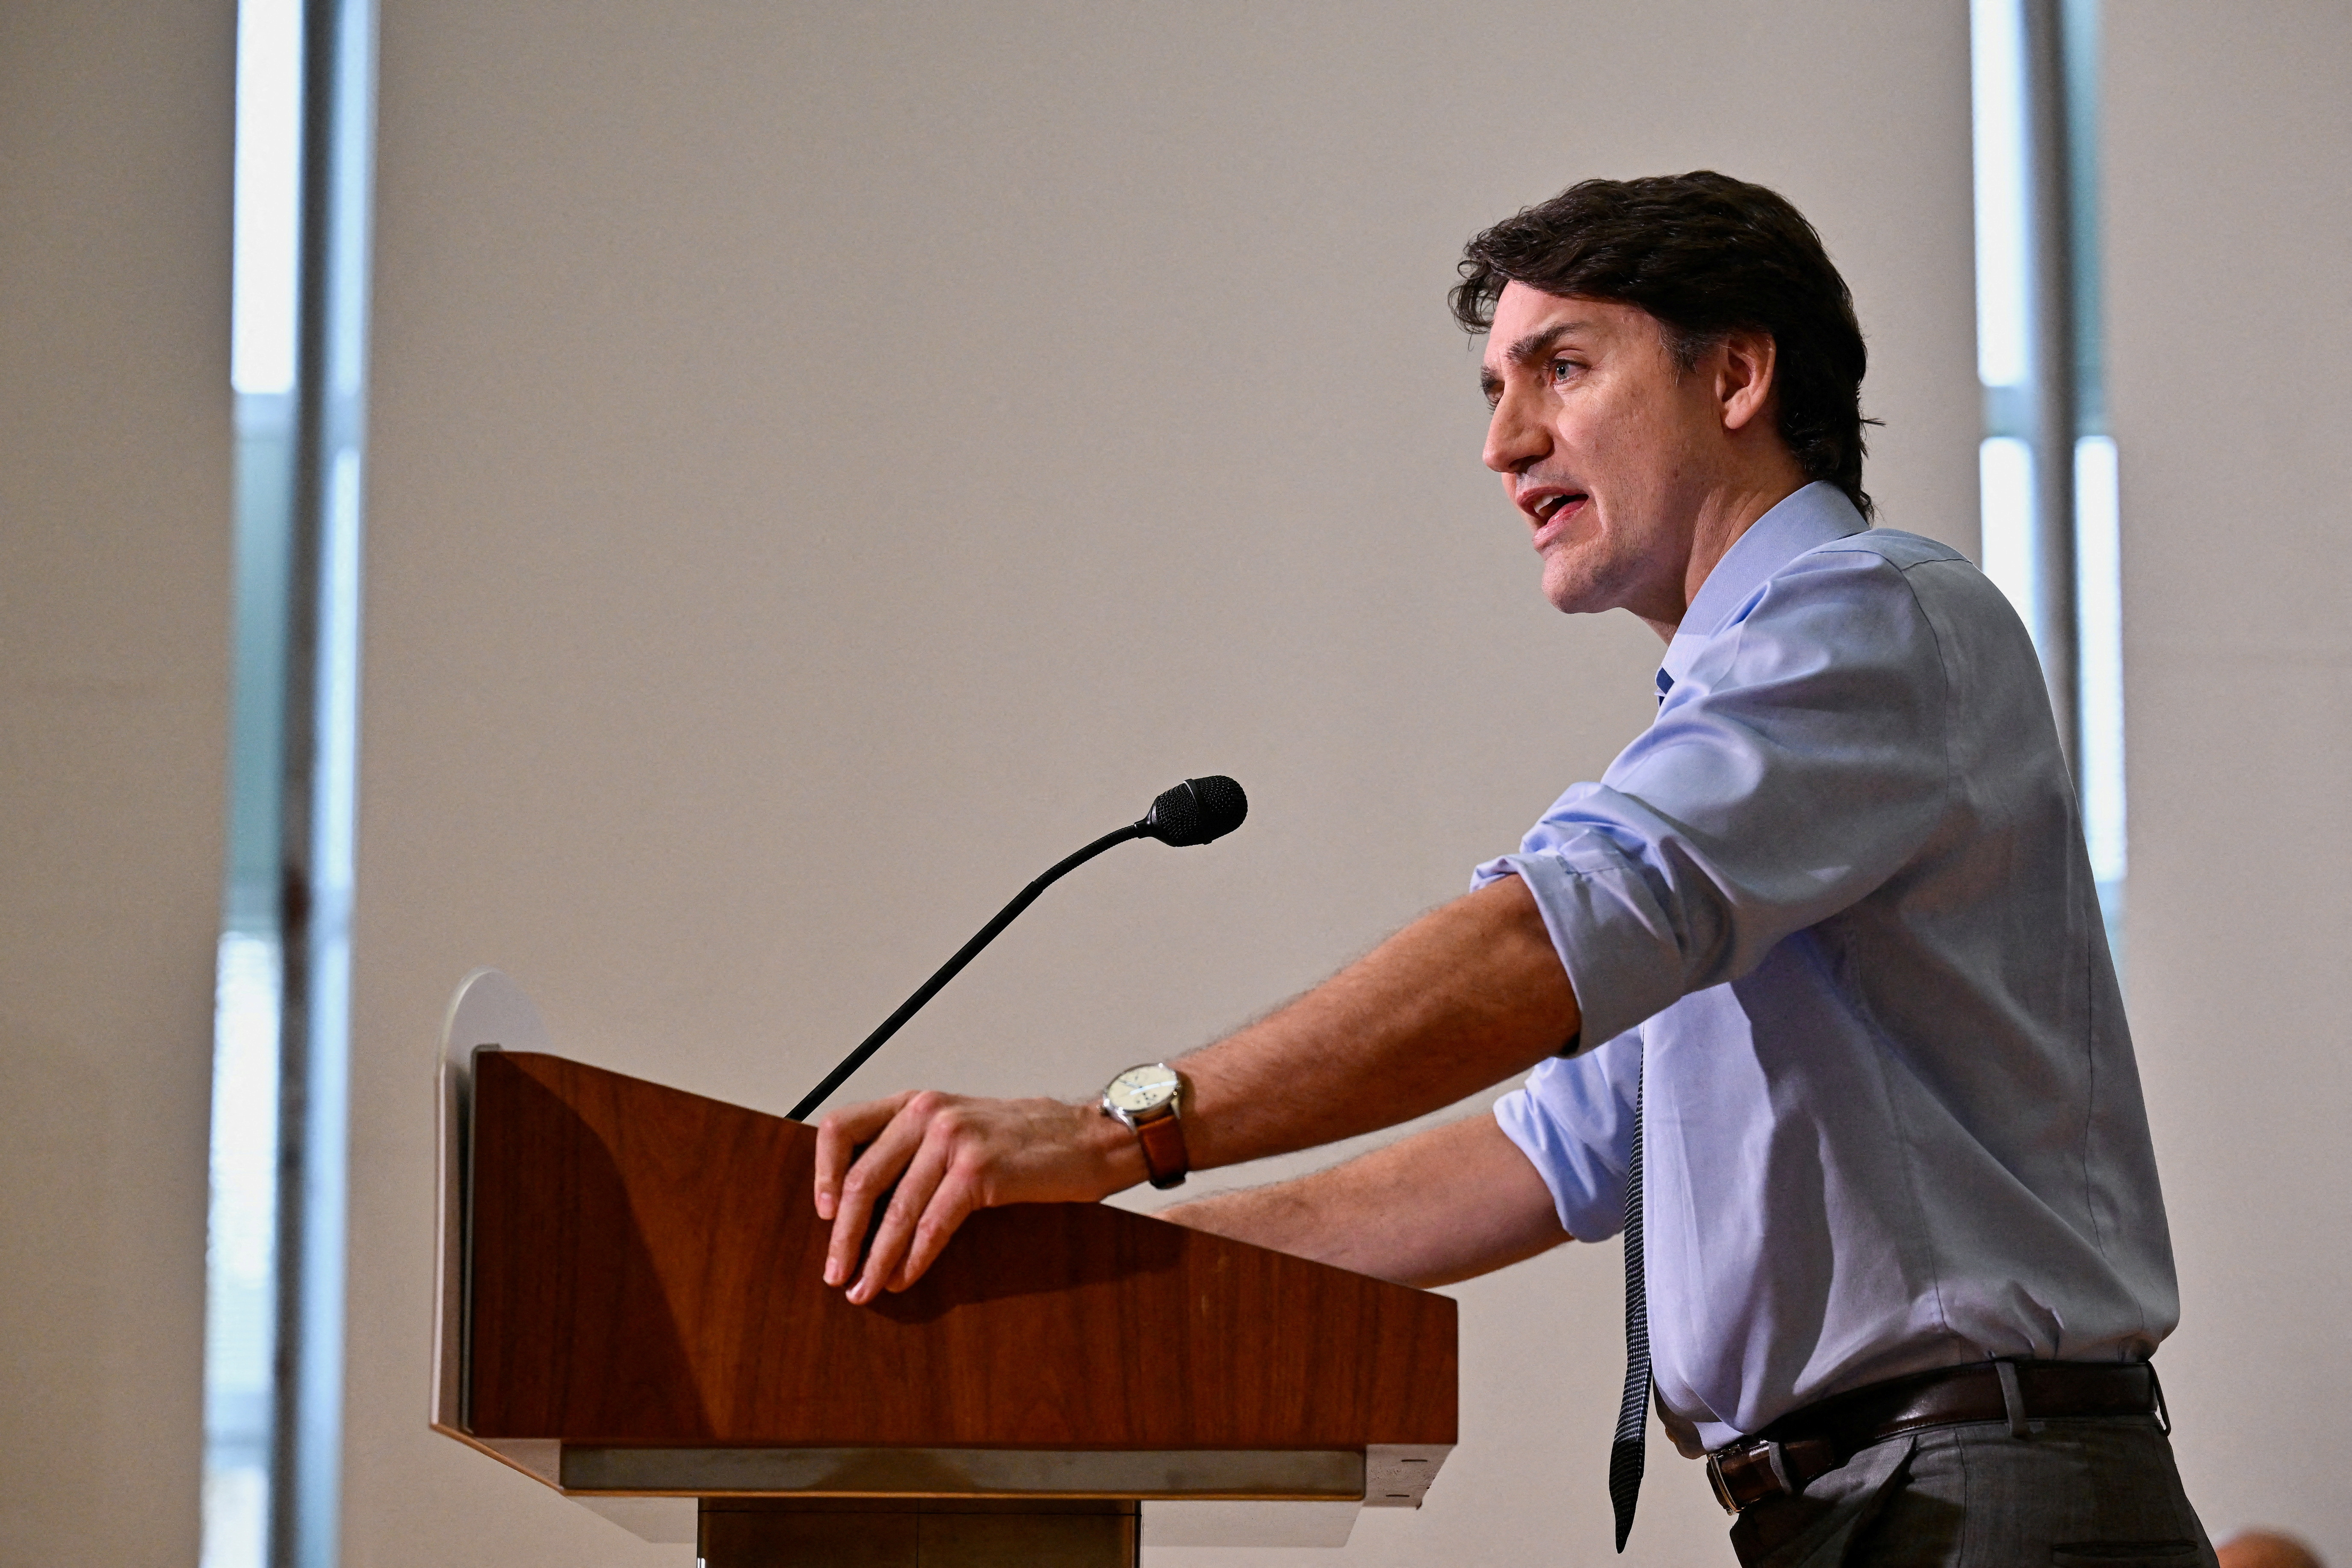 Canada's Prime Minister Justin Trudeau visits the west coast, in Vancouver